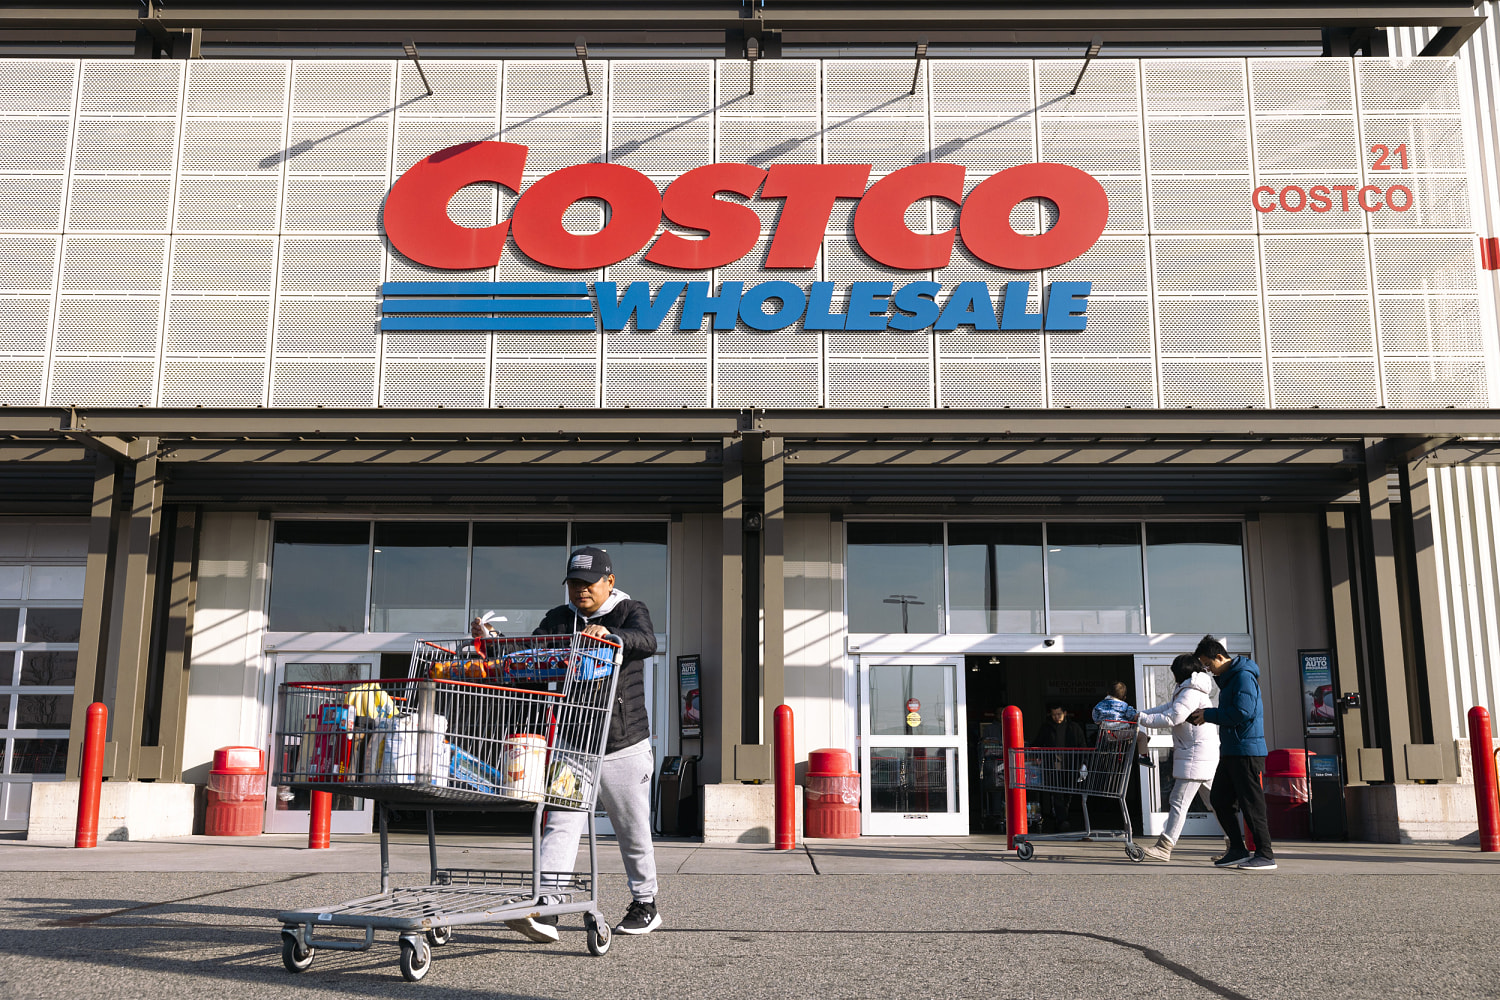 Doomsday dinners: Costco sells 'apocalypse bucket' with food that lasts 25 years